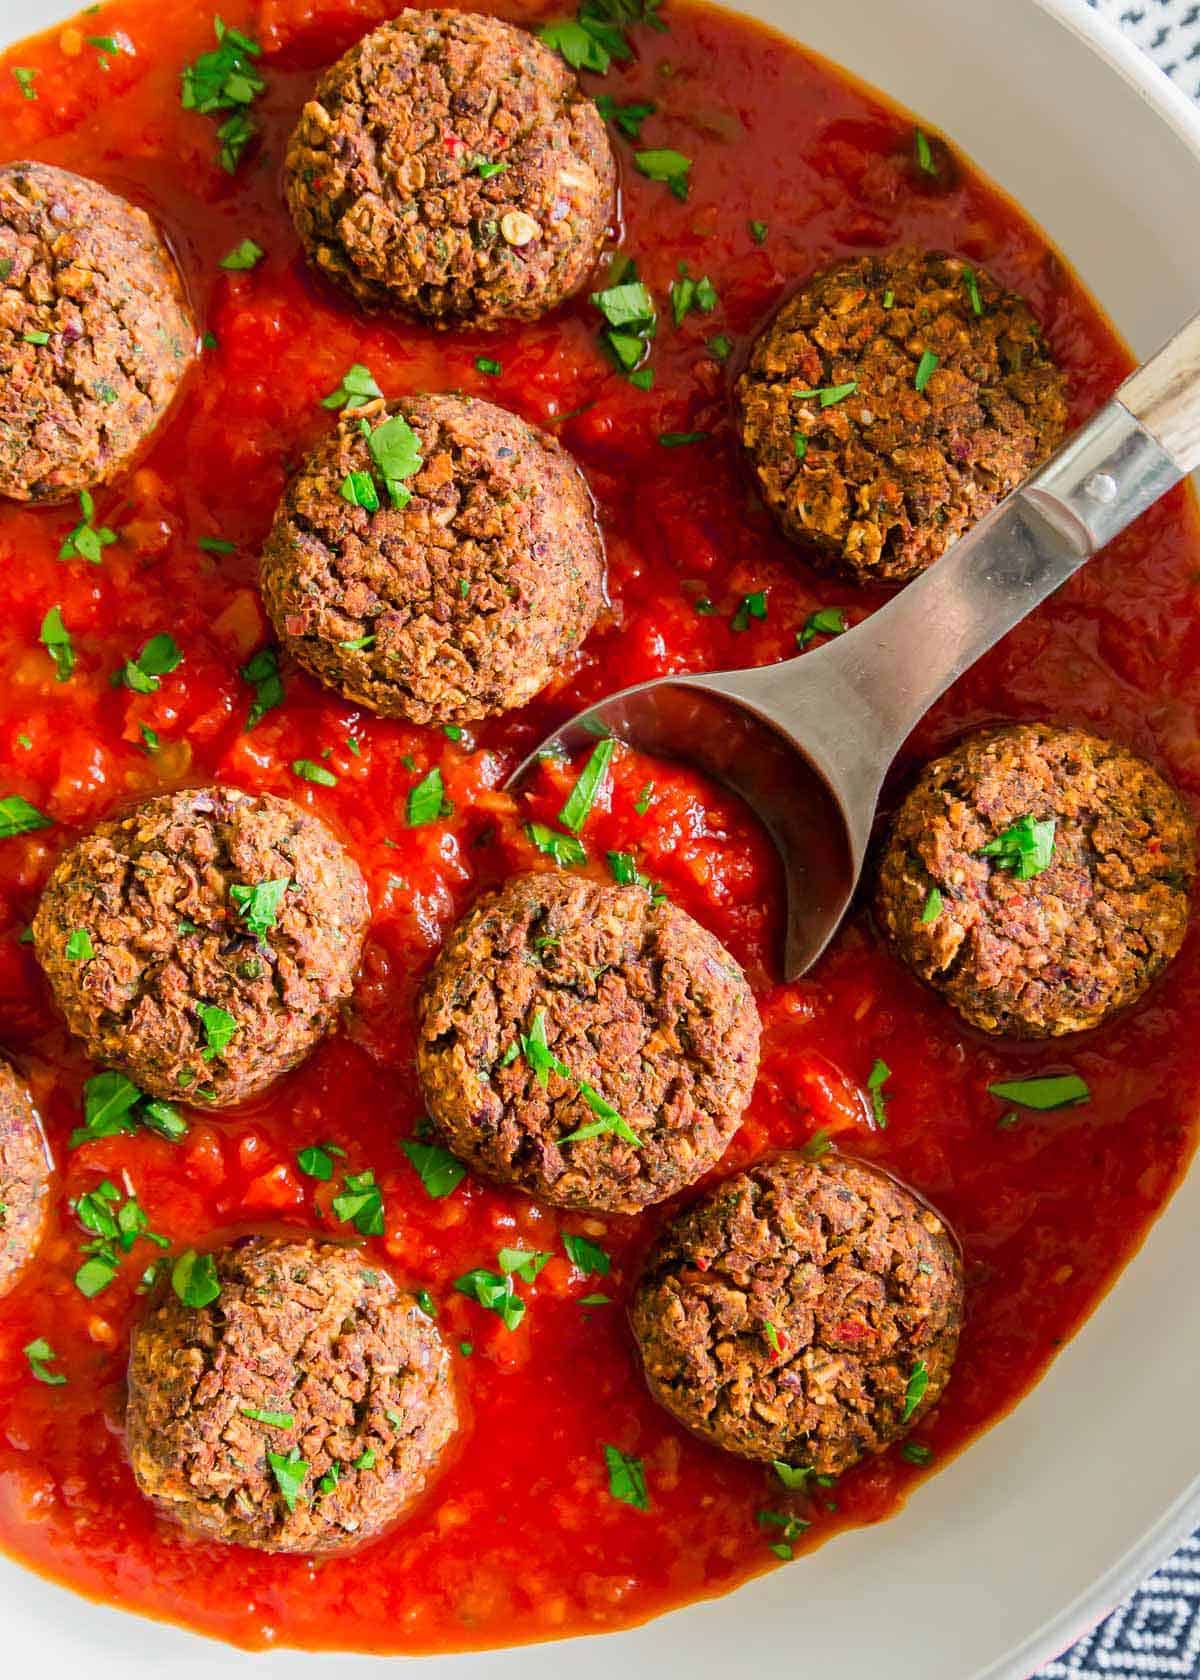 These Italian flavored black bean meatballs are a delicious and hearty plant based alternative to traditional meatballs. Serve with your favorite marinara sauce over pasta or zoodles for a comforting healthful meal.